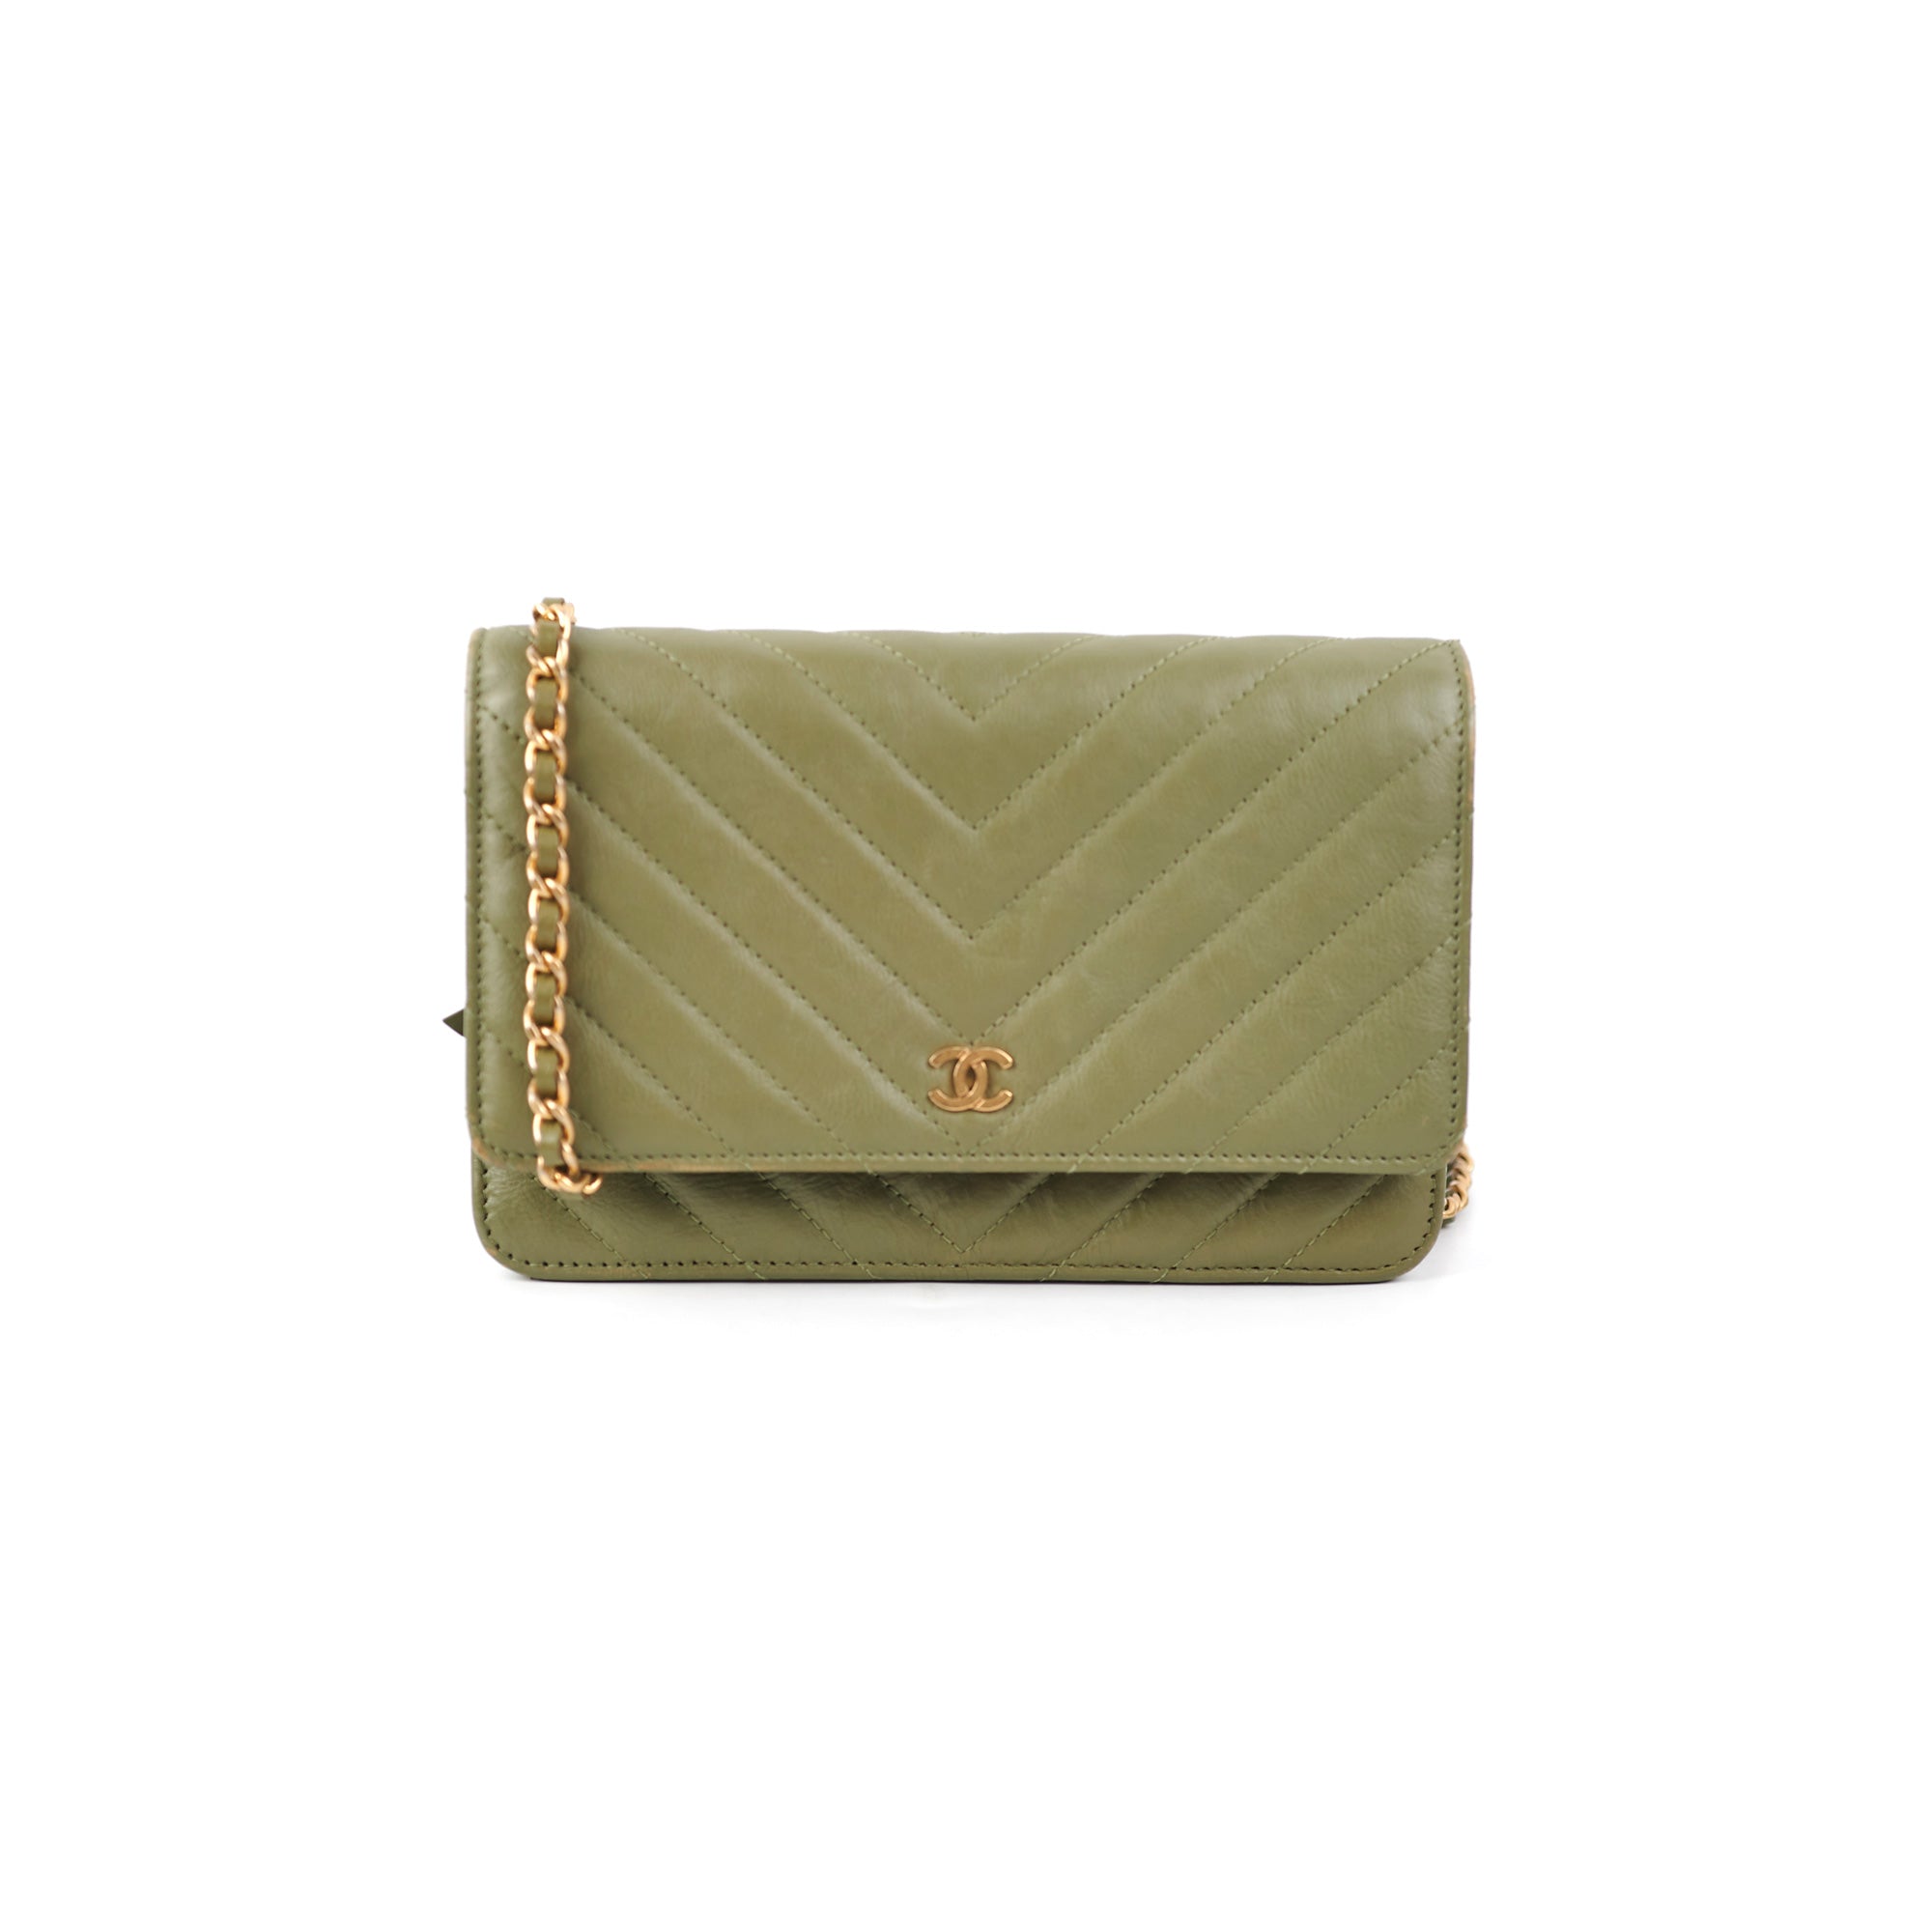 Chanel Classic Wallet on Chain Green Lambskin with Gold Hardware Preowned  in Box WA001  Julia Rose Boston  Shop